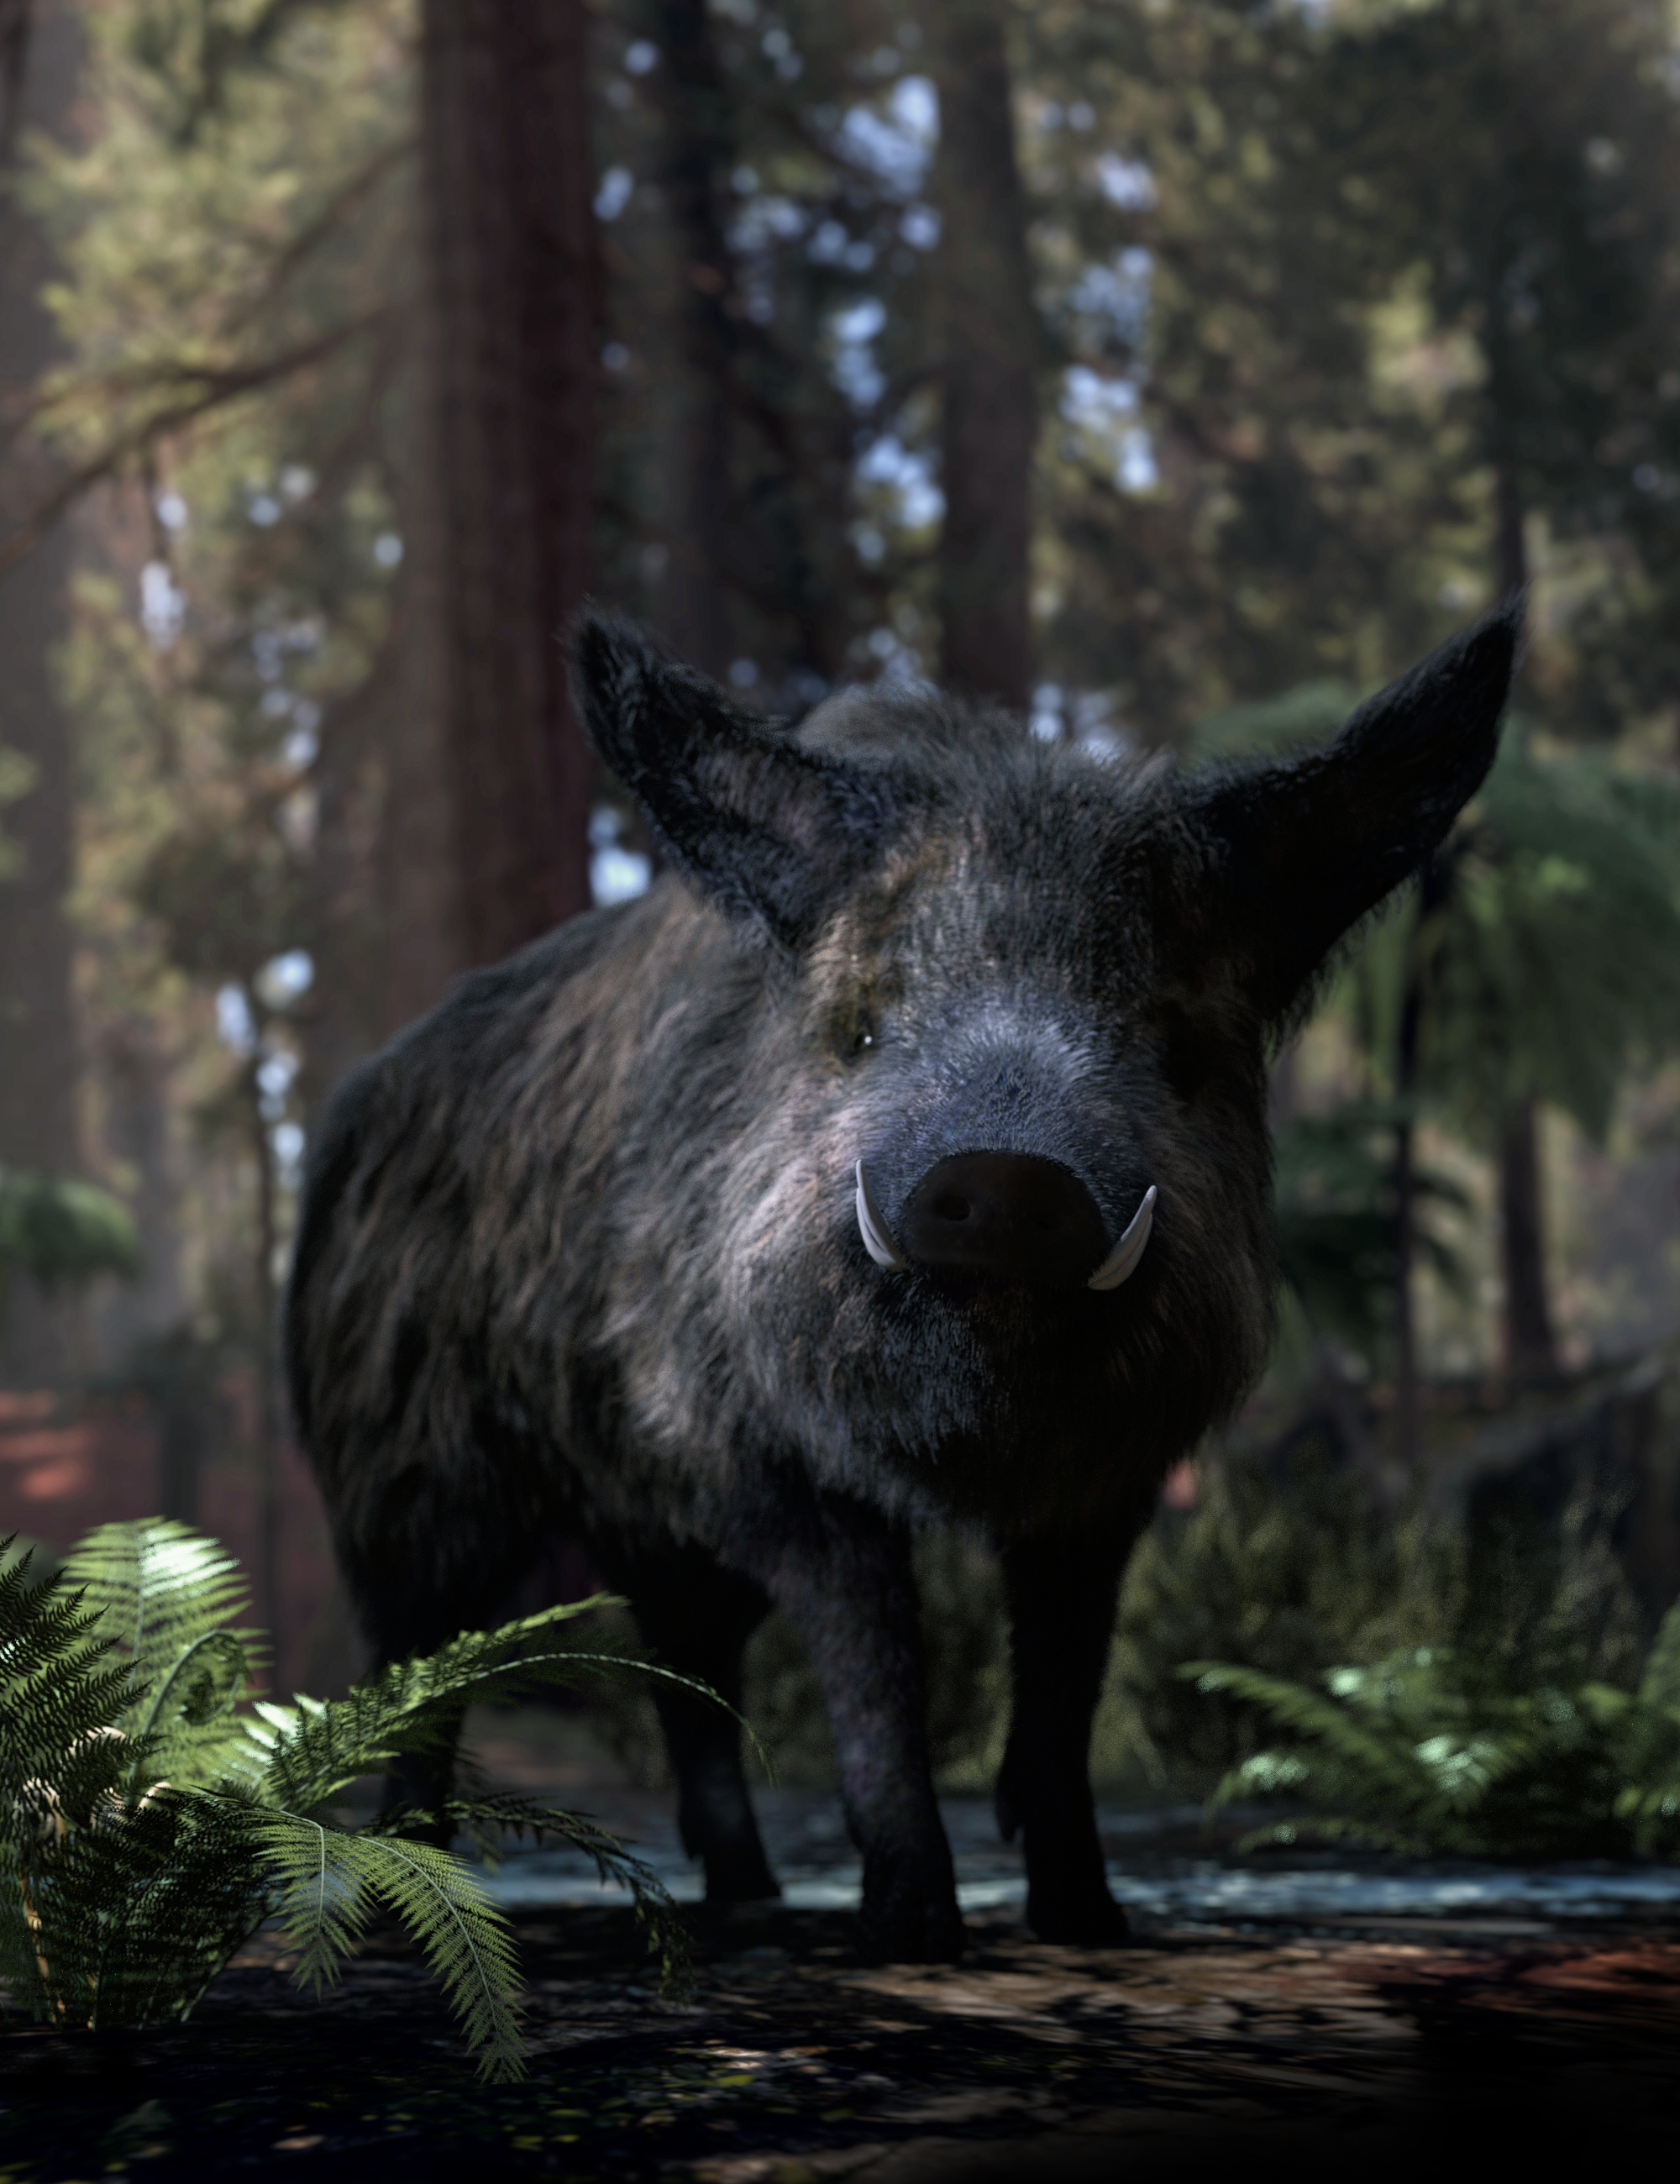 Wild Boar by AM by: Alessandro_AM, 3D Models by Daz 3D